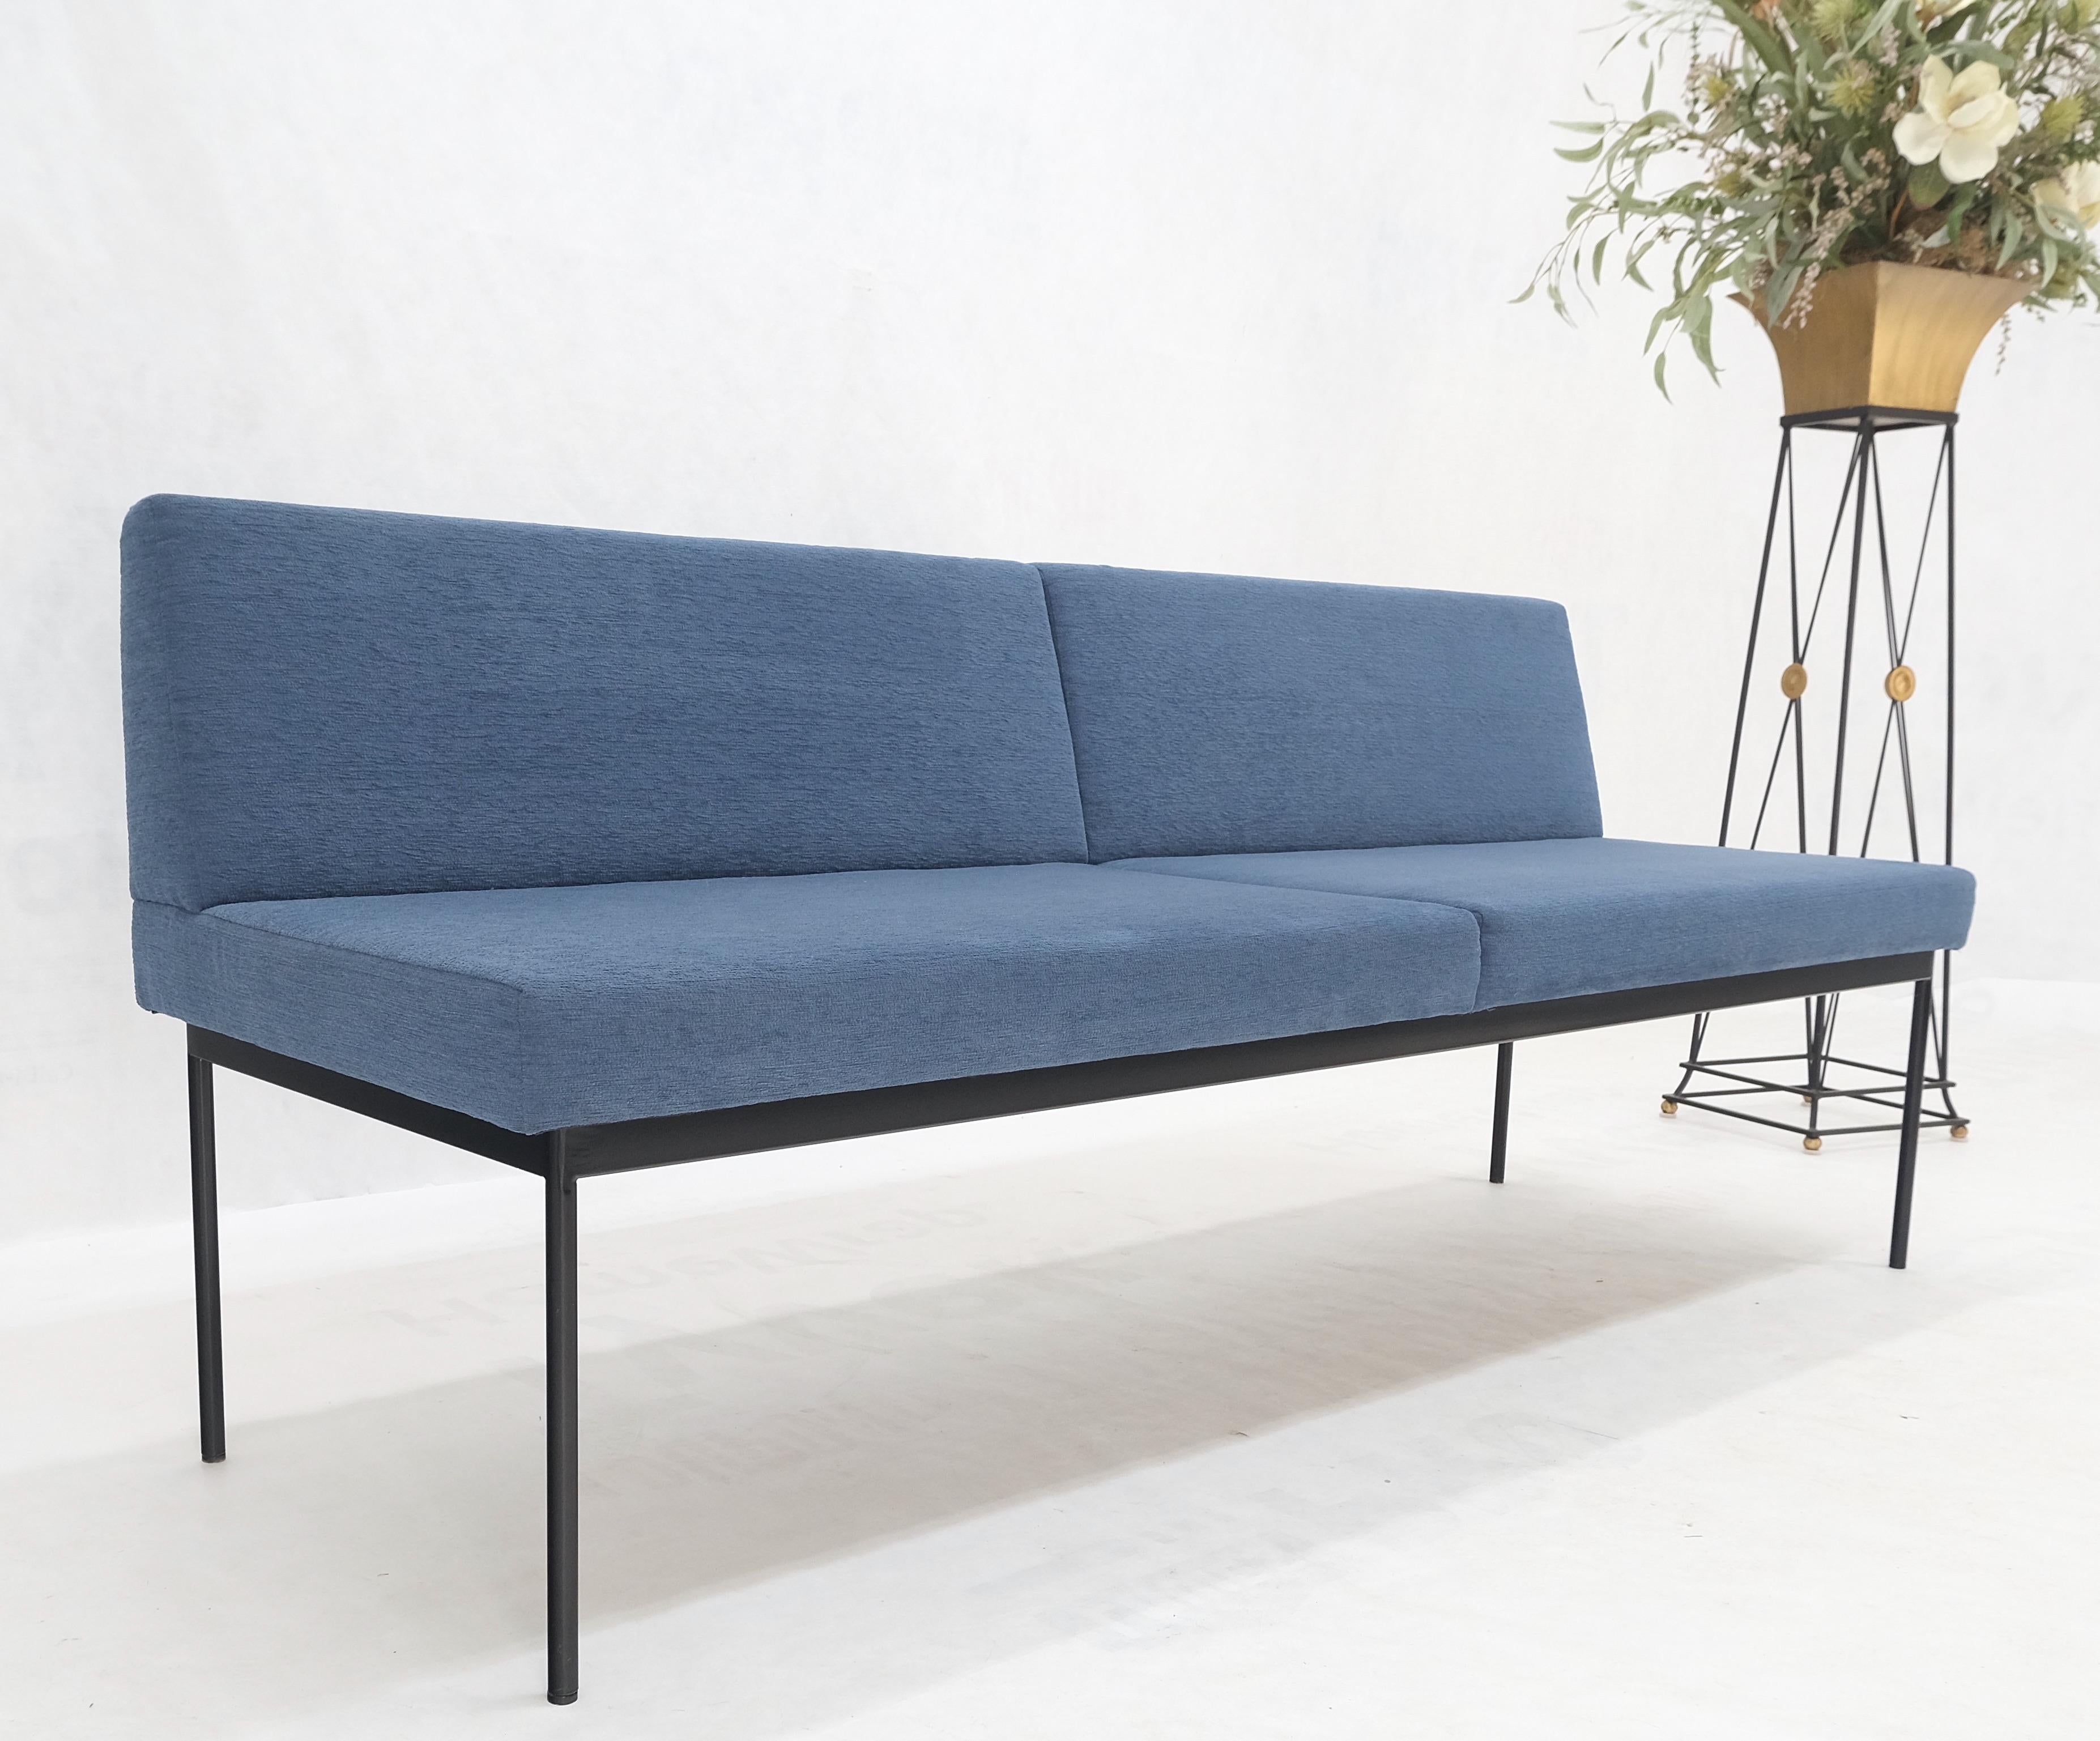 Geiger Tuxido lounge sofa couch bench seating blue upholstery black frame mint!